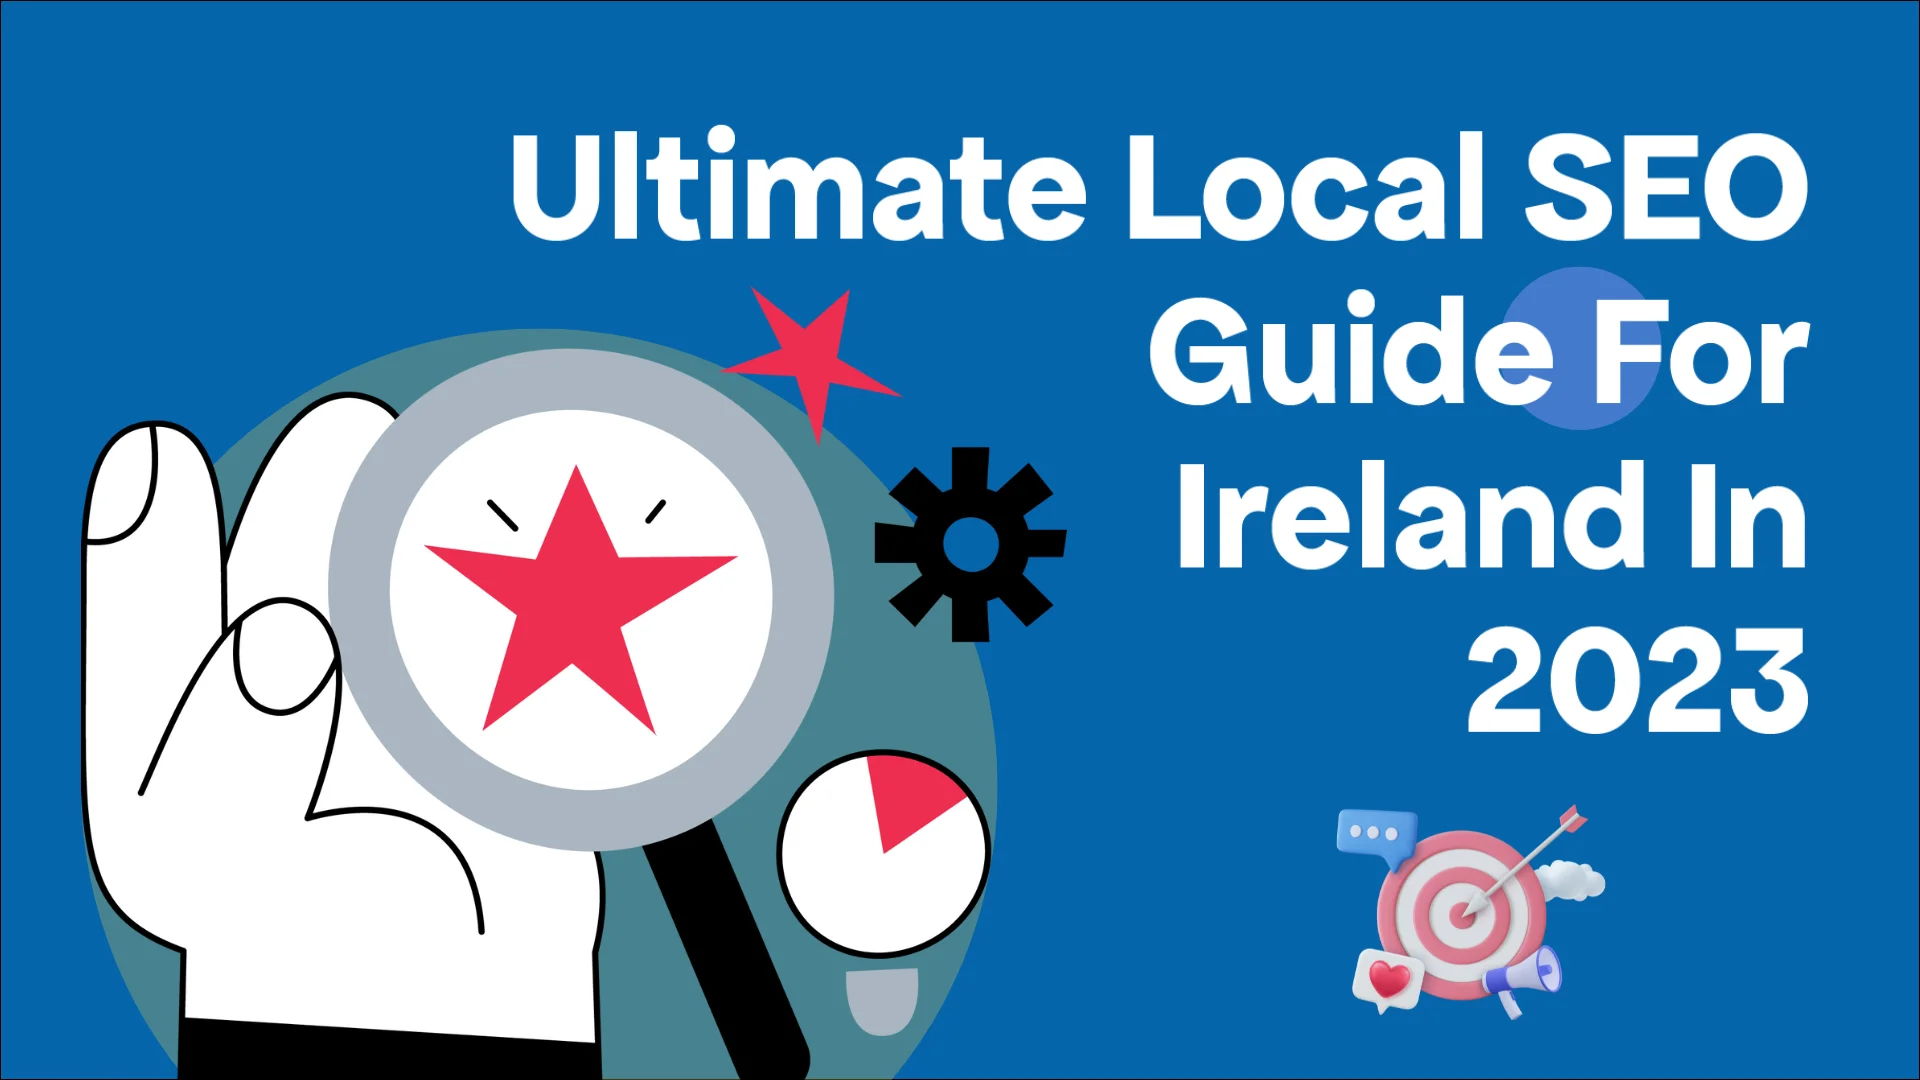 Ultimate Local SEO Guide for Ireland in 2023